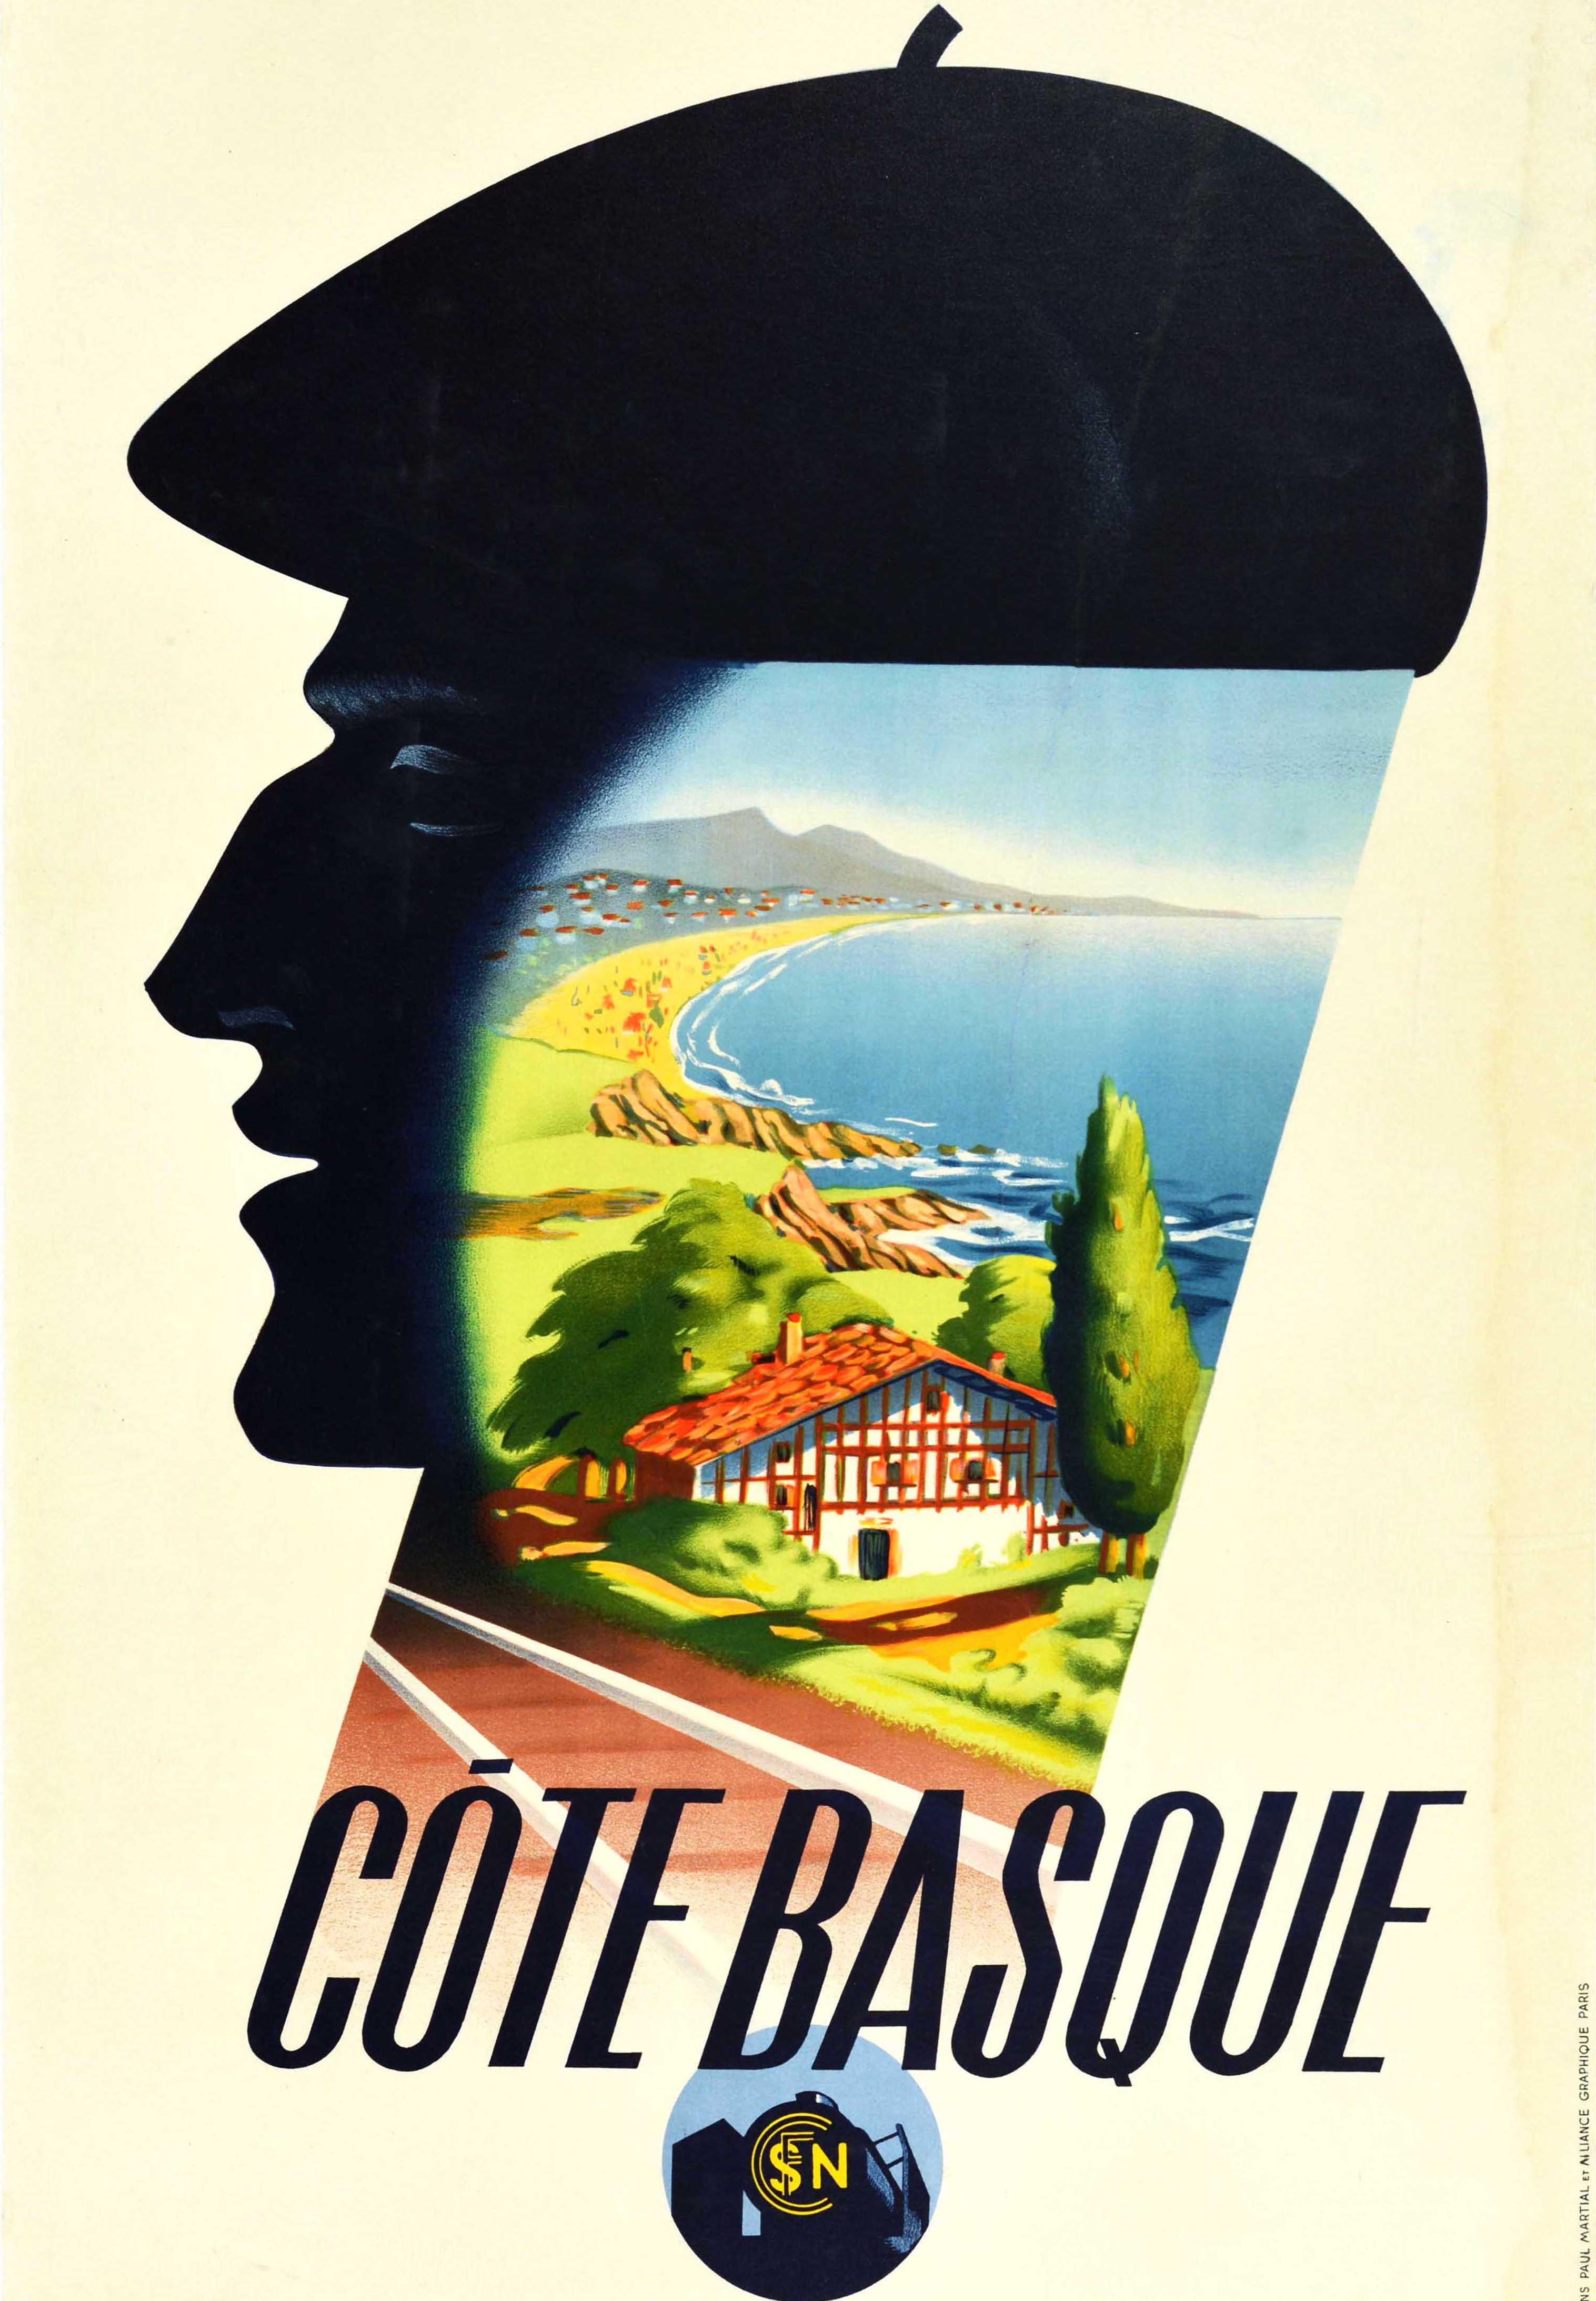 Original Vintage Poster For Cote Basque Coast SNCF French Railway Travel Design In Fair Condition For Sale In London, GB